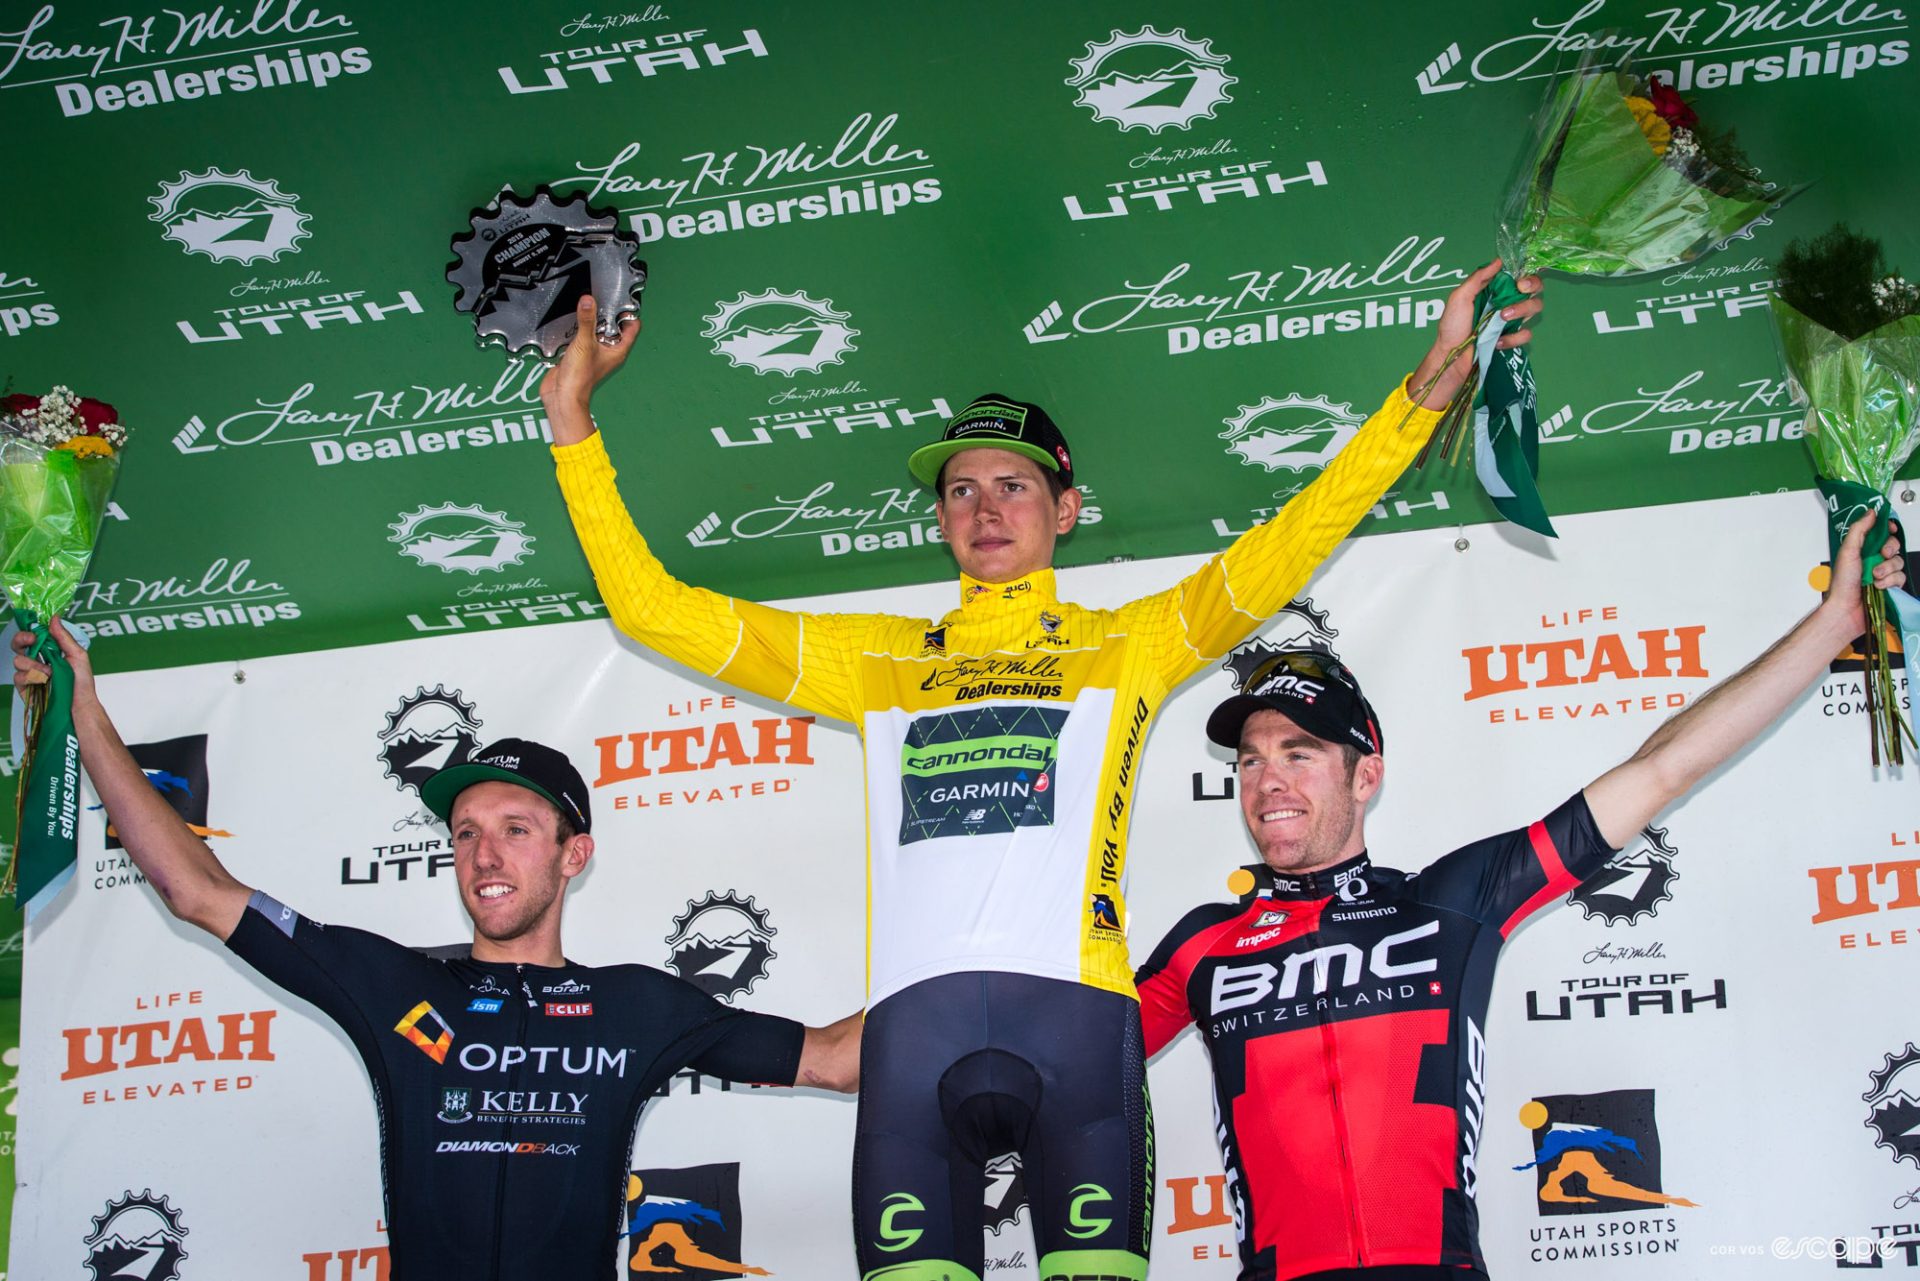 Joe Dombrowski celebrates on the podium of the Tour of Utah. He's in the yellow jersey of race leader, and is flanked by Michael Woods on his right and Brent Bookwalter to his left.